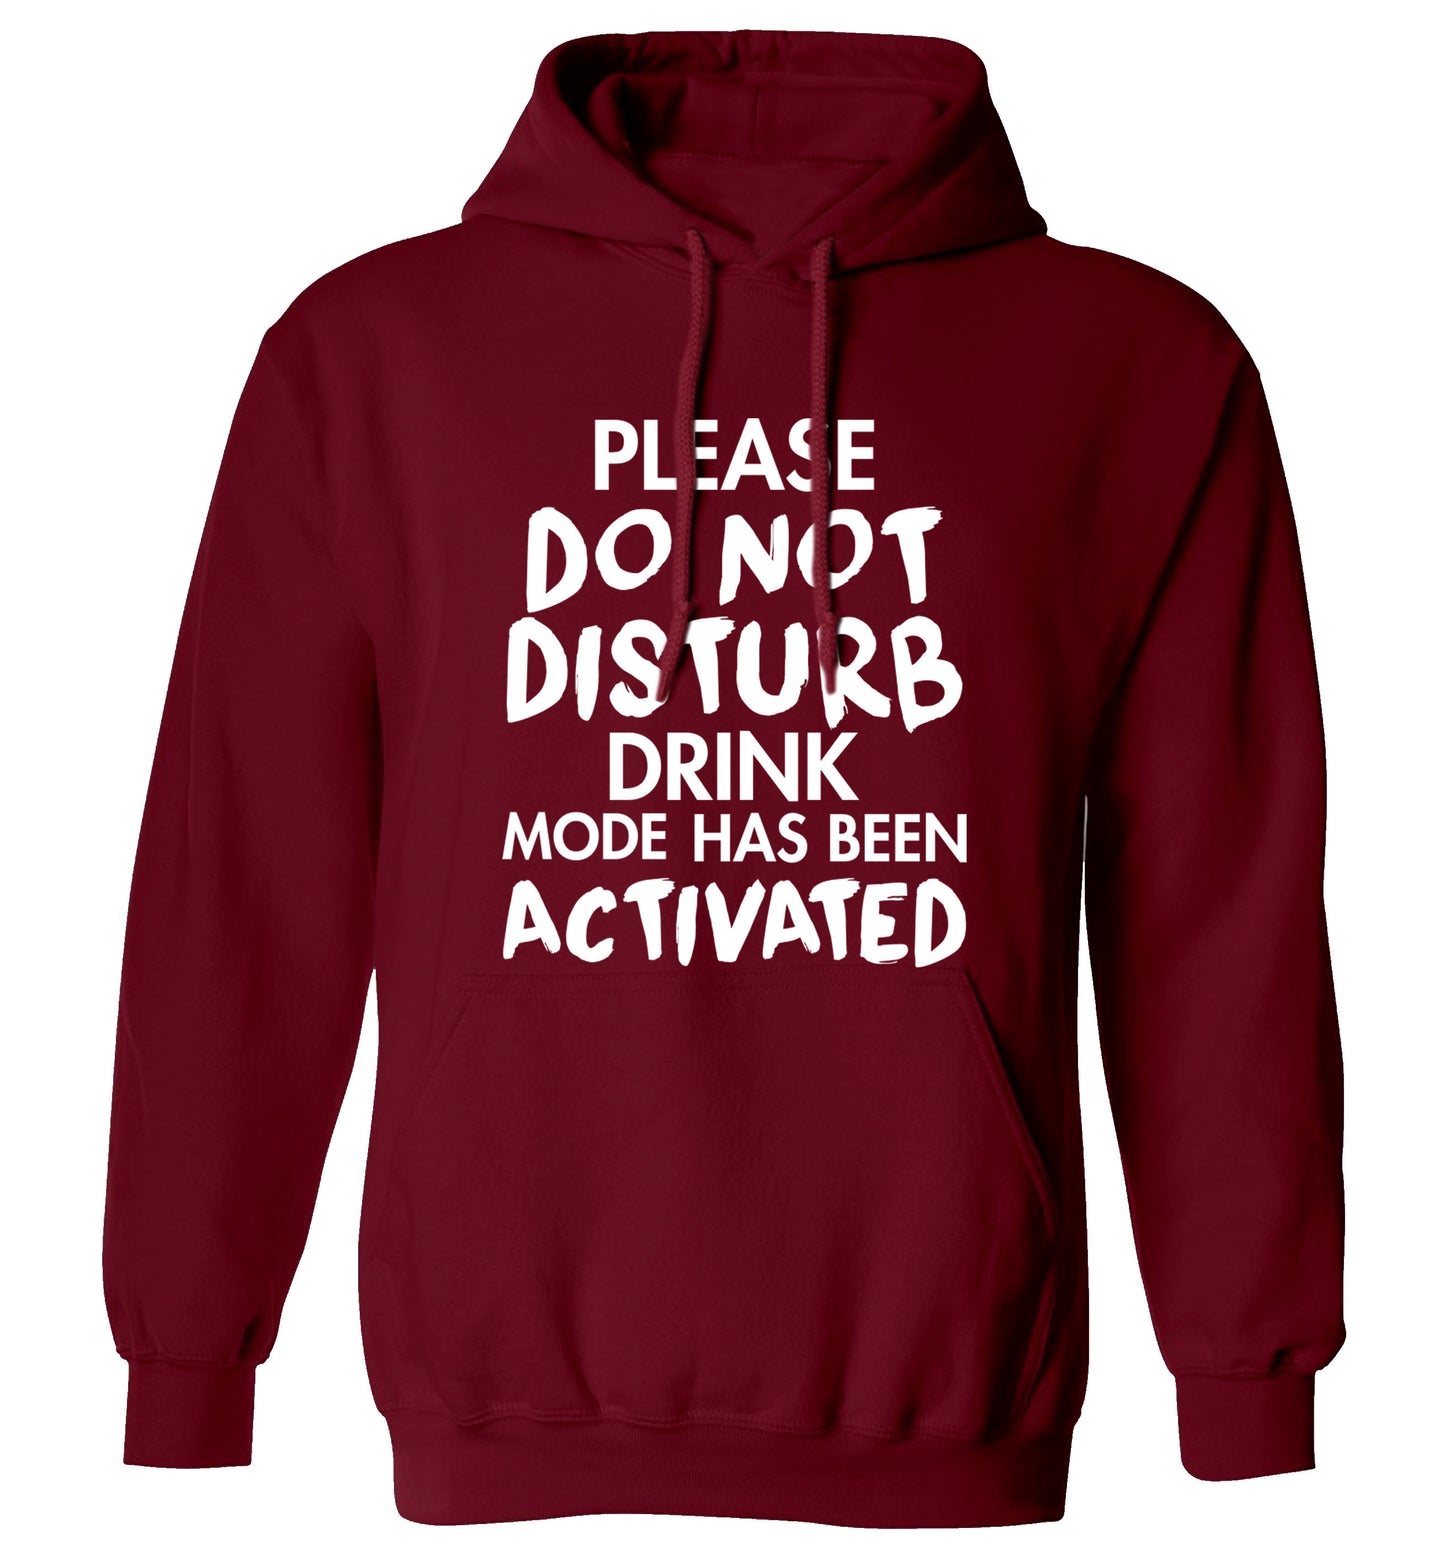 Please do not disturb drink mode has been activated adults unisex maroon hoodie 2XL